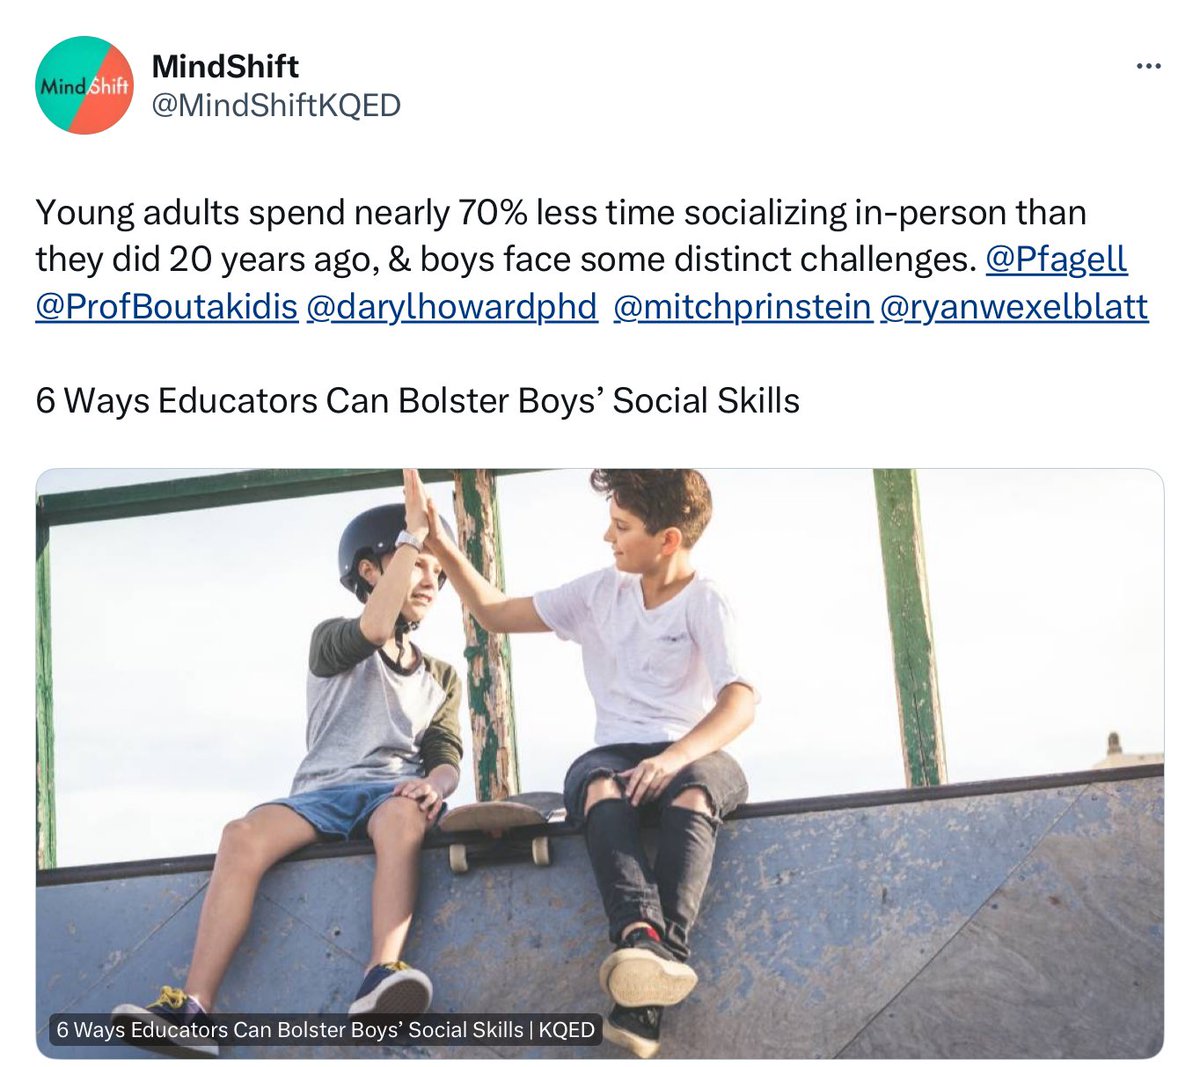 In my new article for @mindshiftkqed, I write about boys’ distinct social needs & share 6 ways that educators can help them strengthen their relationships. It was a pleasure to work with wonderful editor @KaraNewhouse & MANY great sources. Link to read: kqed.org/mindshift/6345…